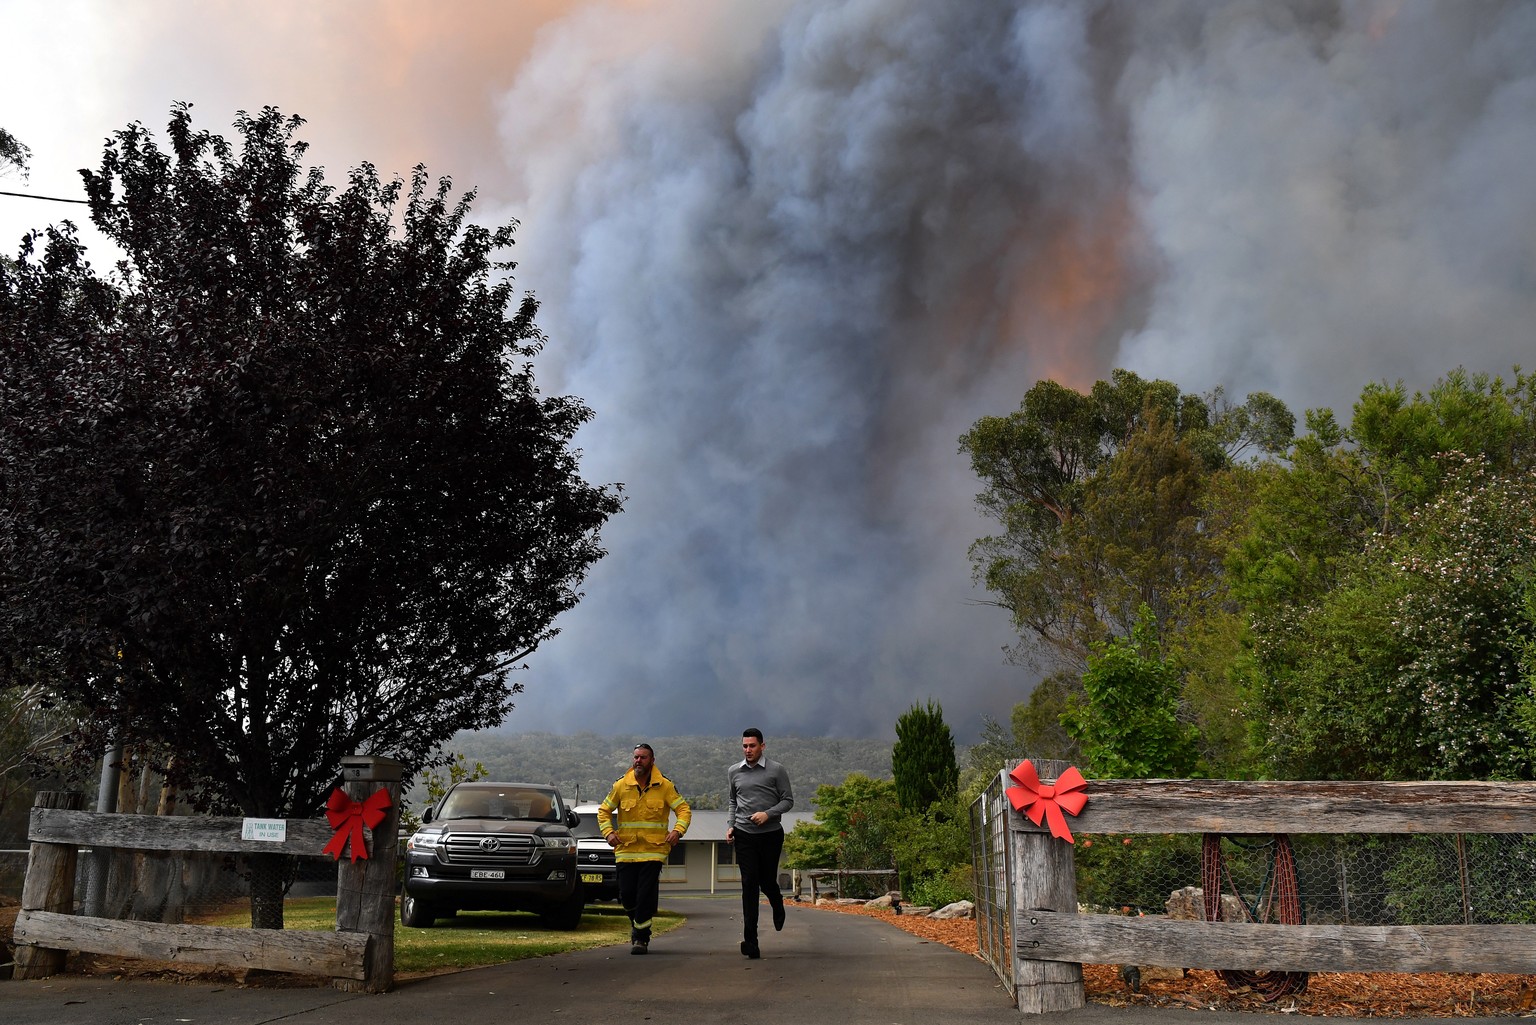 epa08080902 A New South Wales (NSW) Rural Fire Service (RFS) officer and a resident run from a bushfire burning along the Old Hume Highway near the town of Tahmoor, NSW, Australia, 19 December 2019. S ...